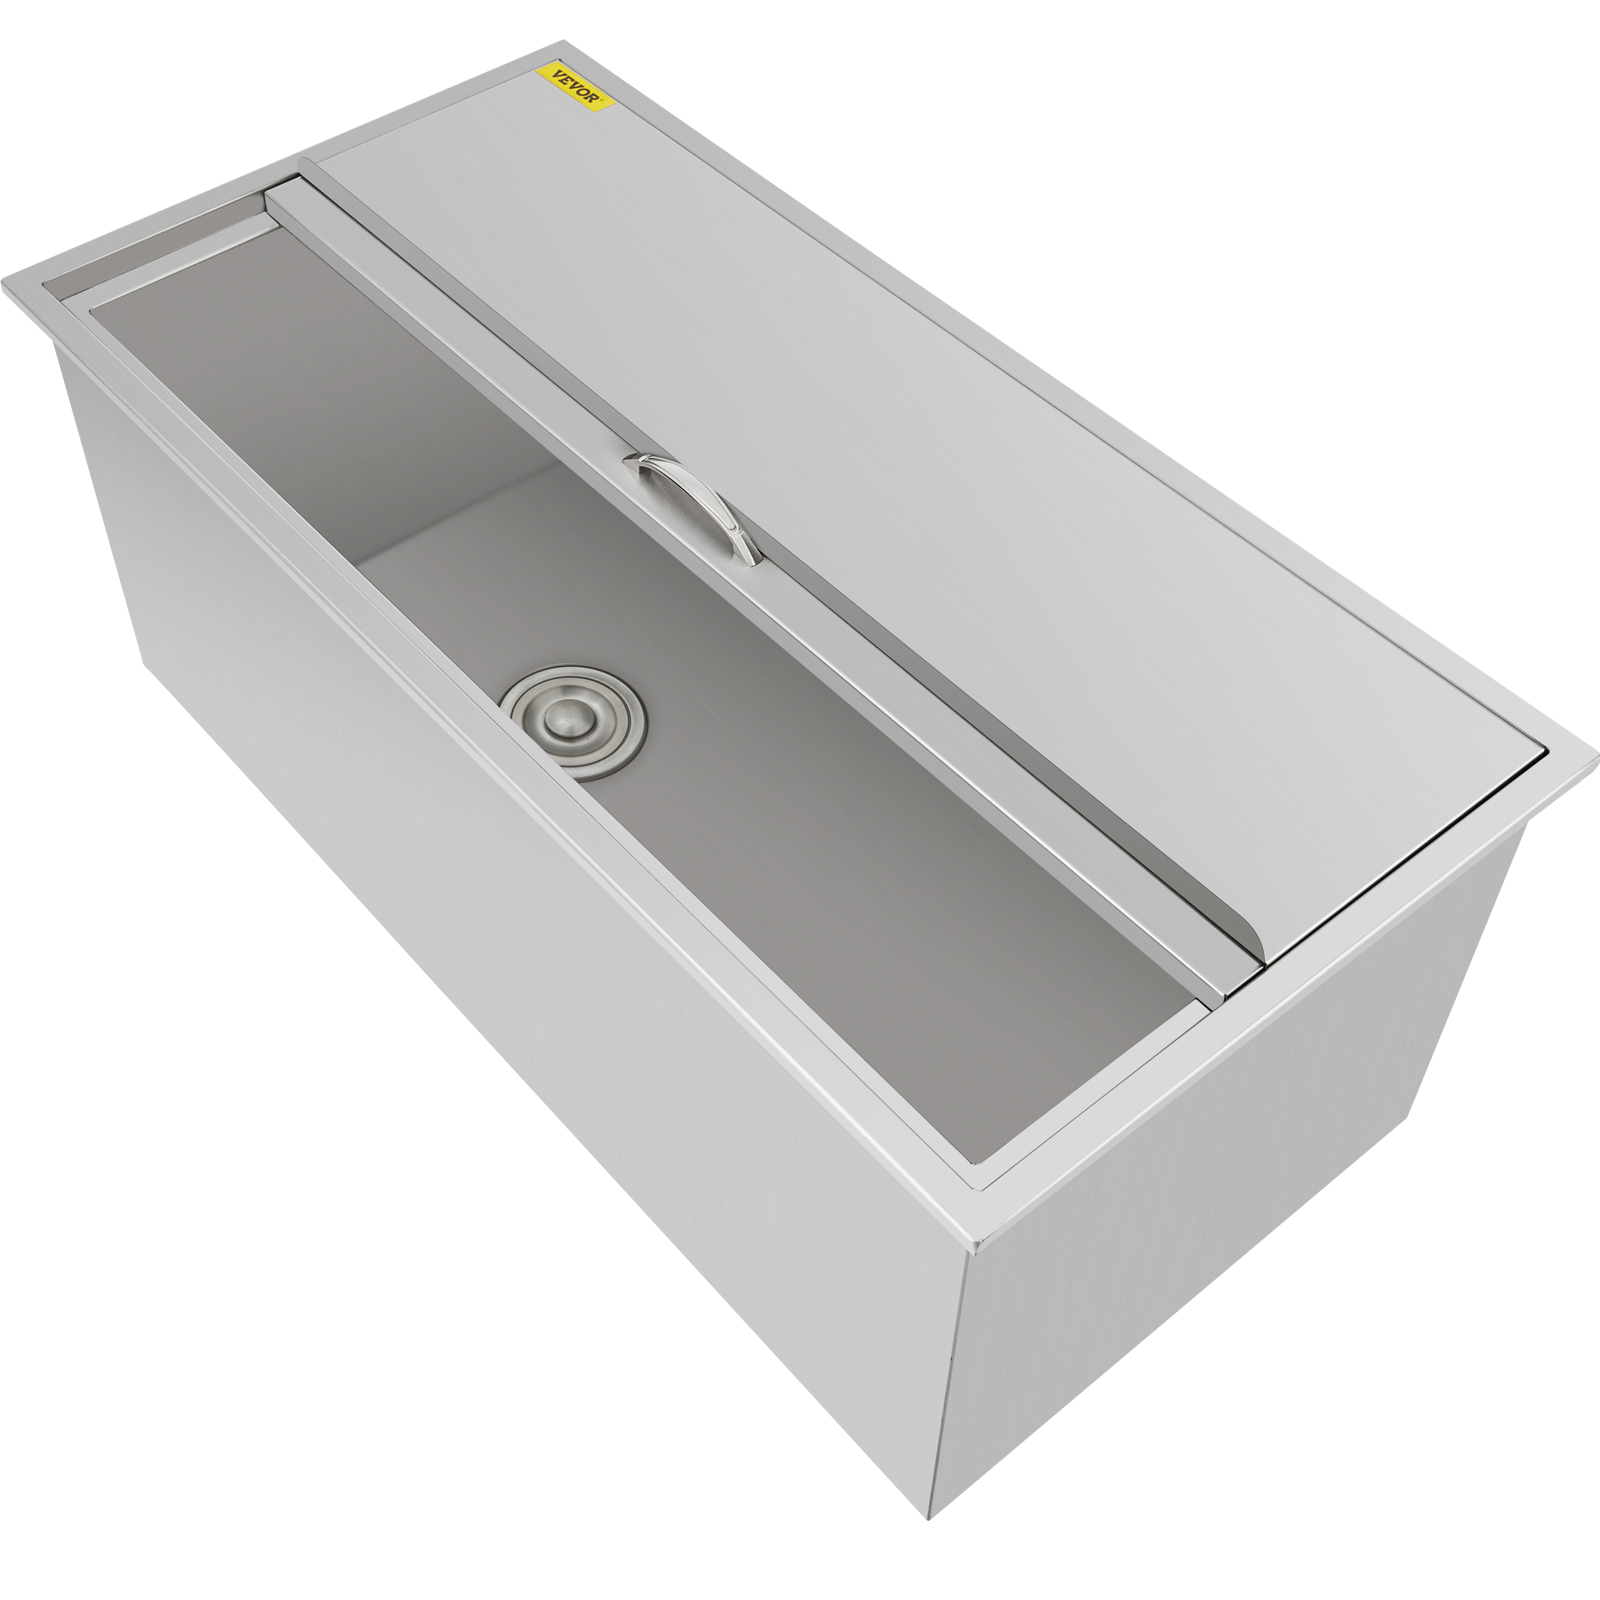 Underbar Ice Bin 23.2 in. x 17.2 in. x 12.1 in. Drop-in Drink Cooler 52.8  Qt. Drop in Ice Chest with Cover for BBQ